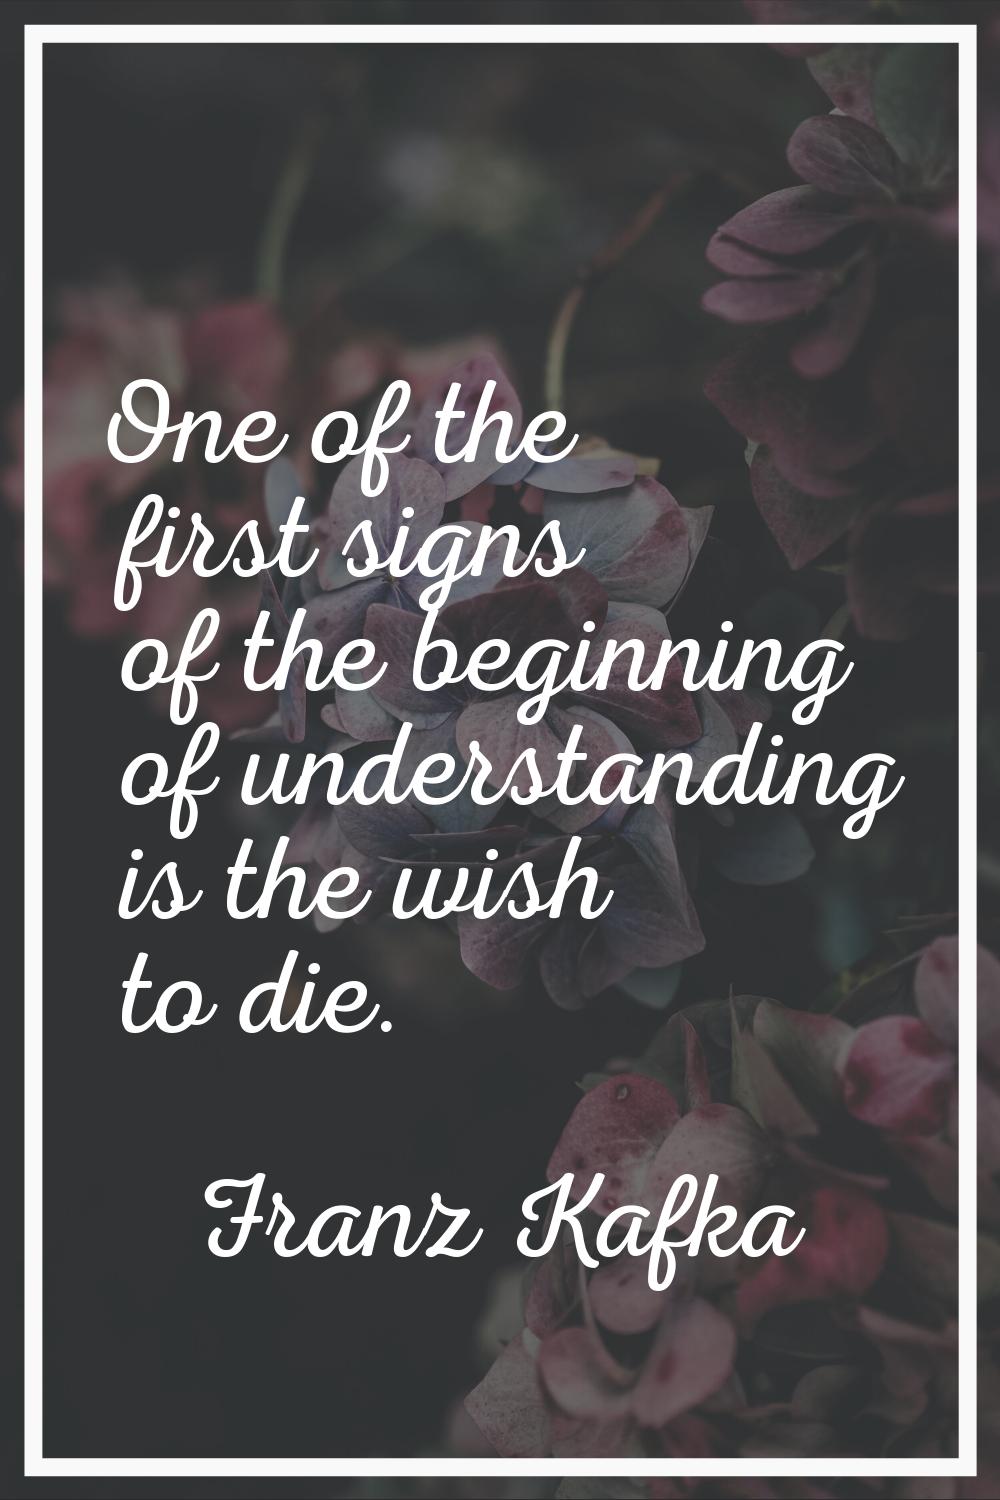 One of the first signs of the beginning of understanding is the wish to die.